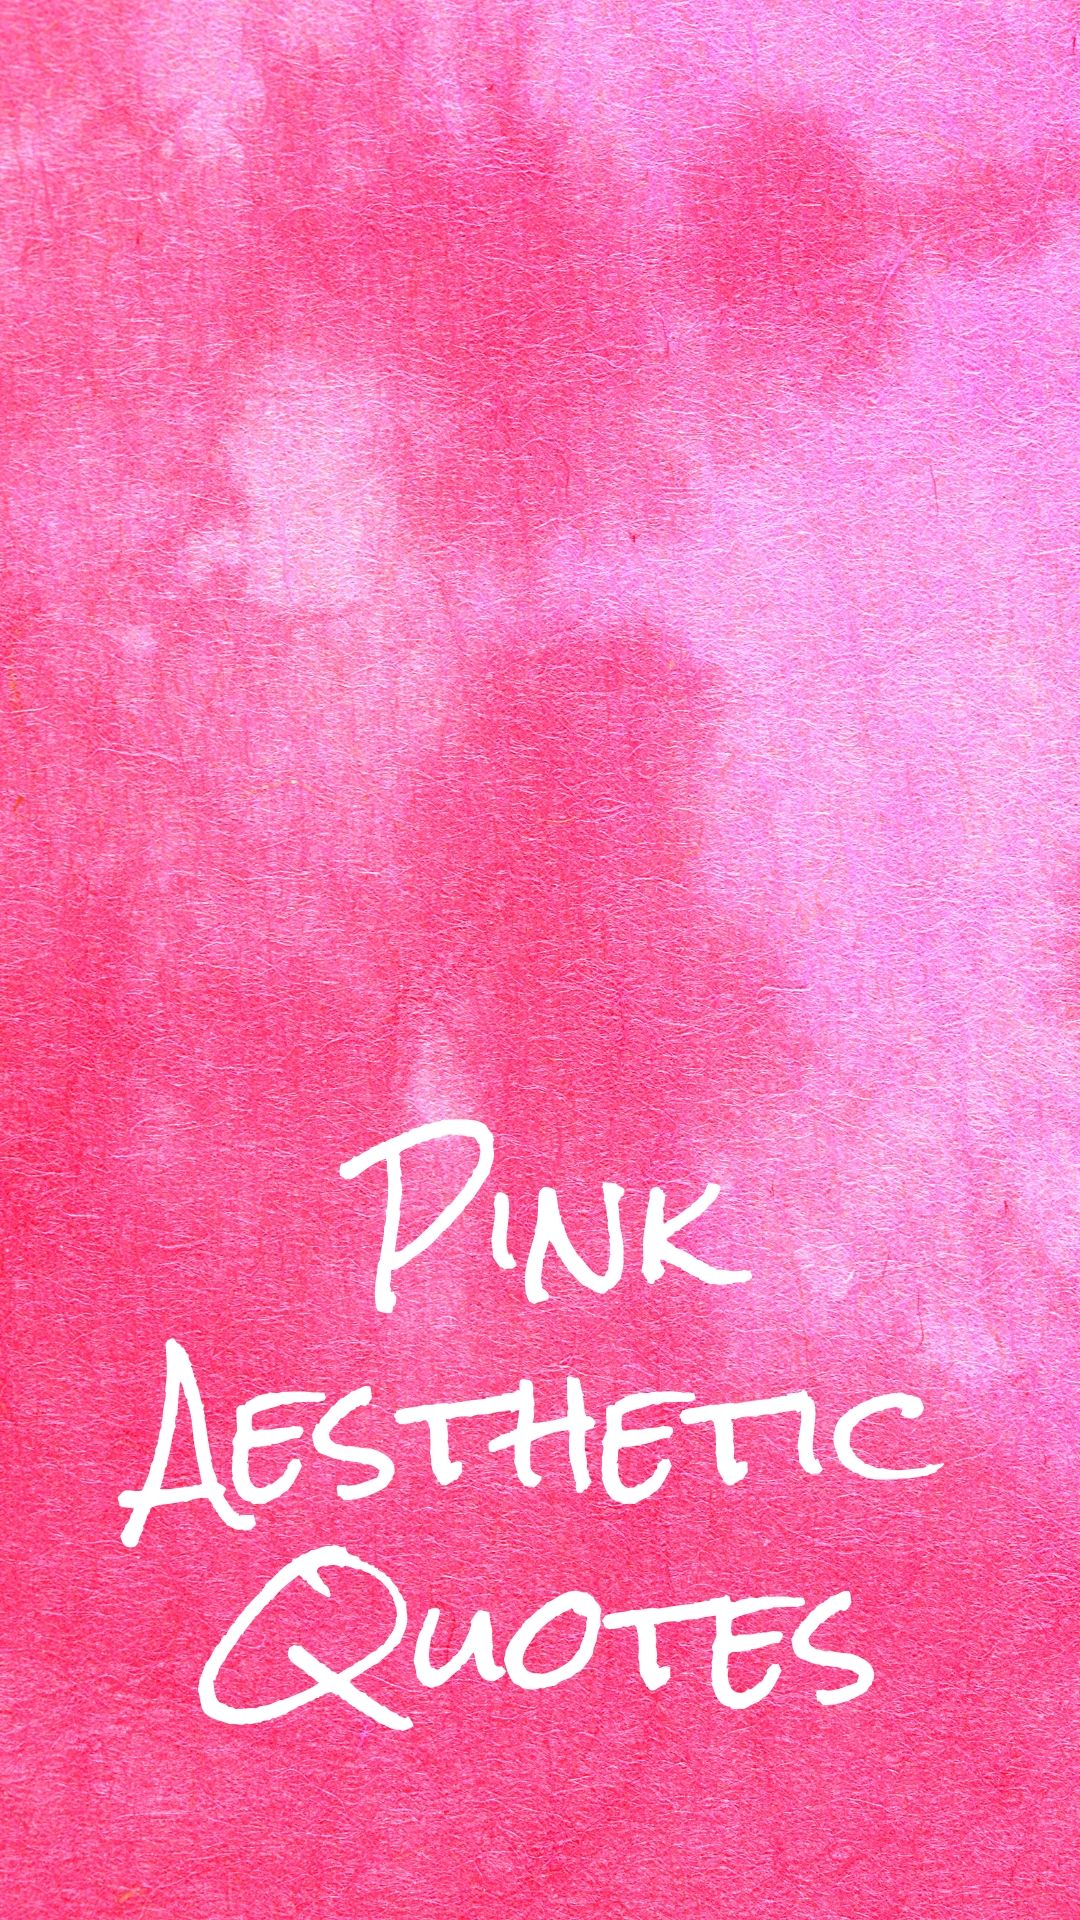 Pink aesthetic wallpapers with quotes and collages